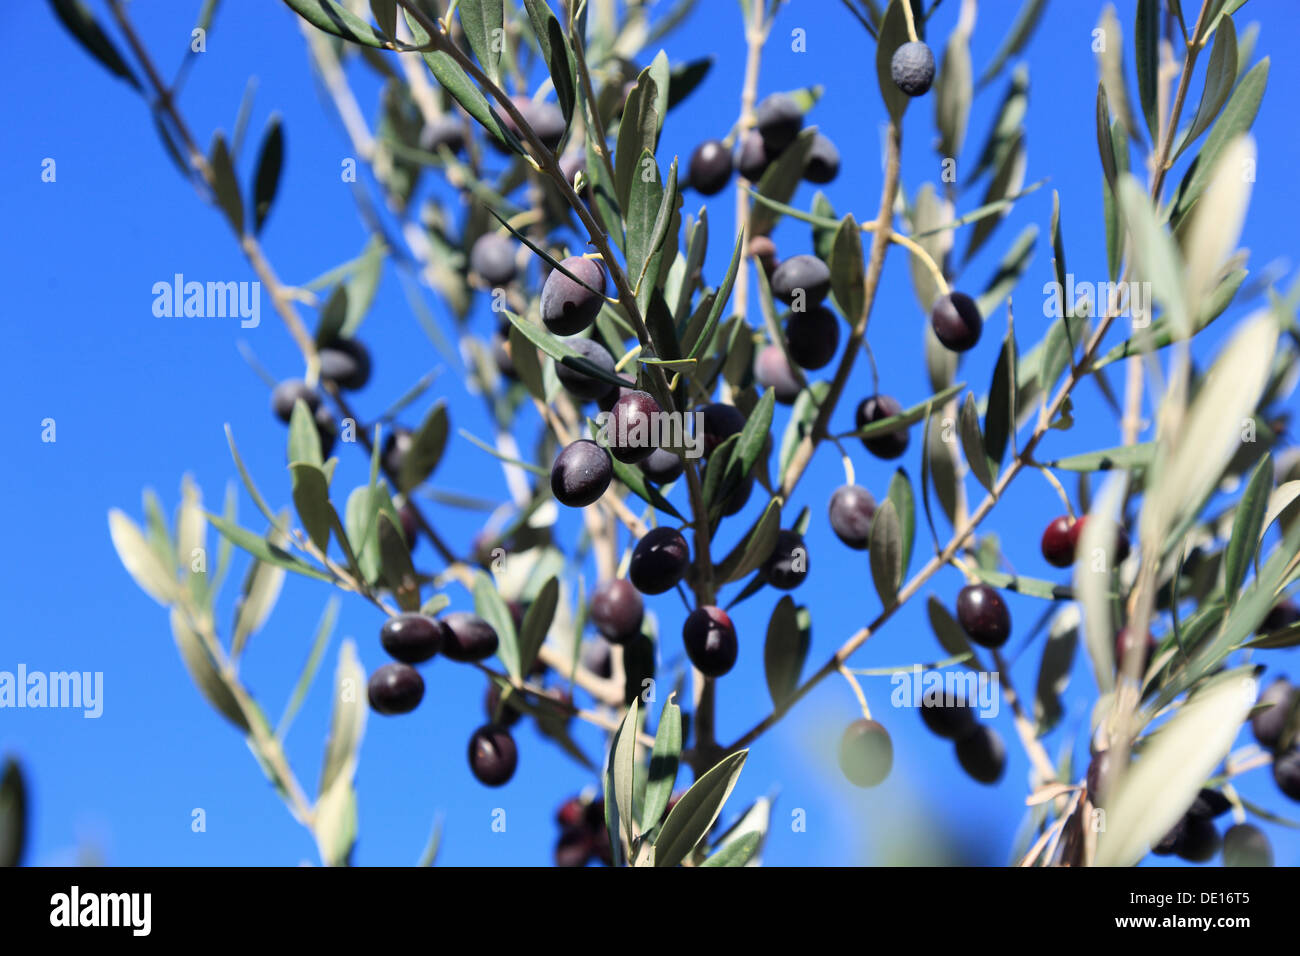 Olive branches with olives, stone fruit, ripe fruits Stock Photo